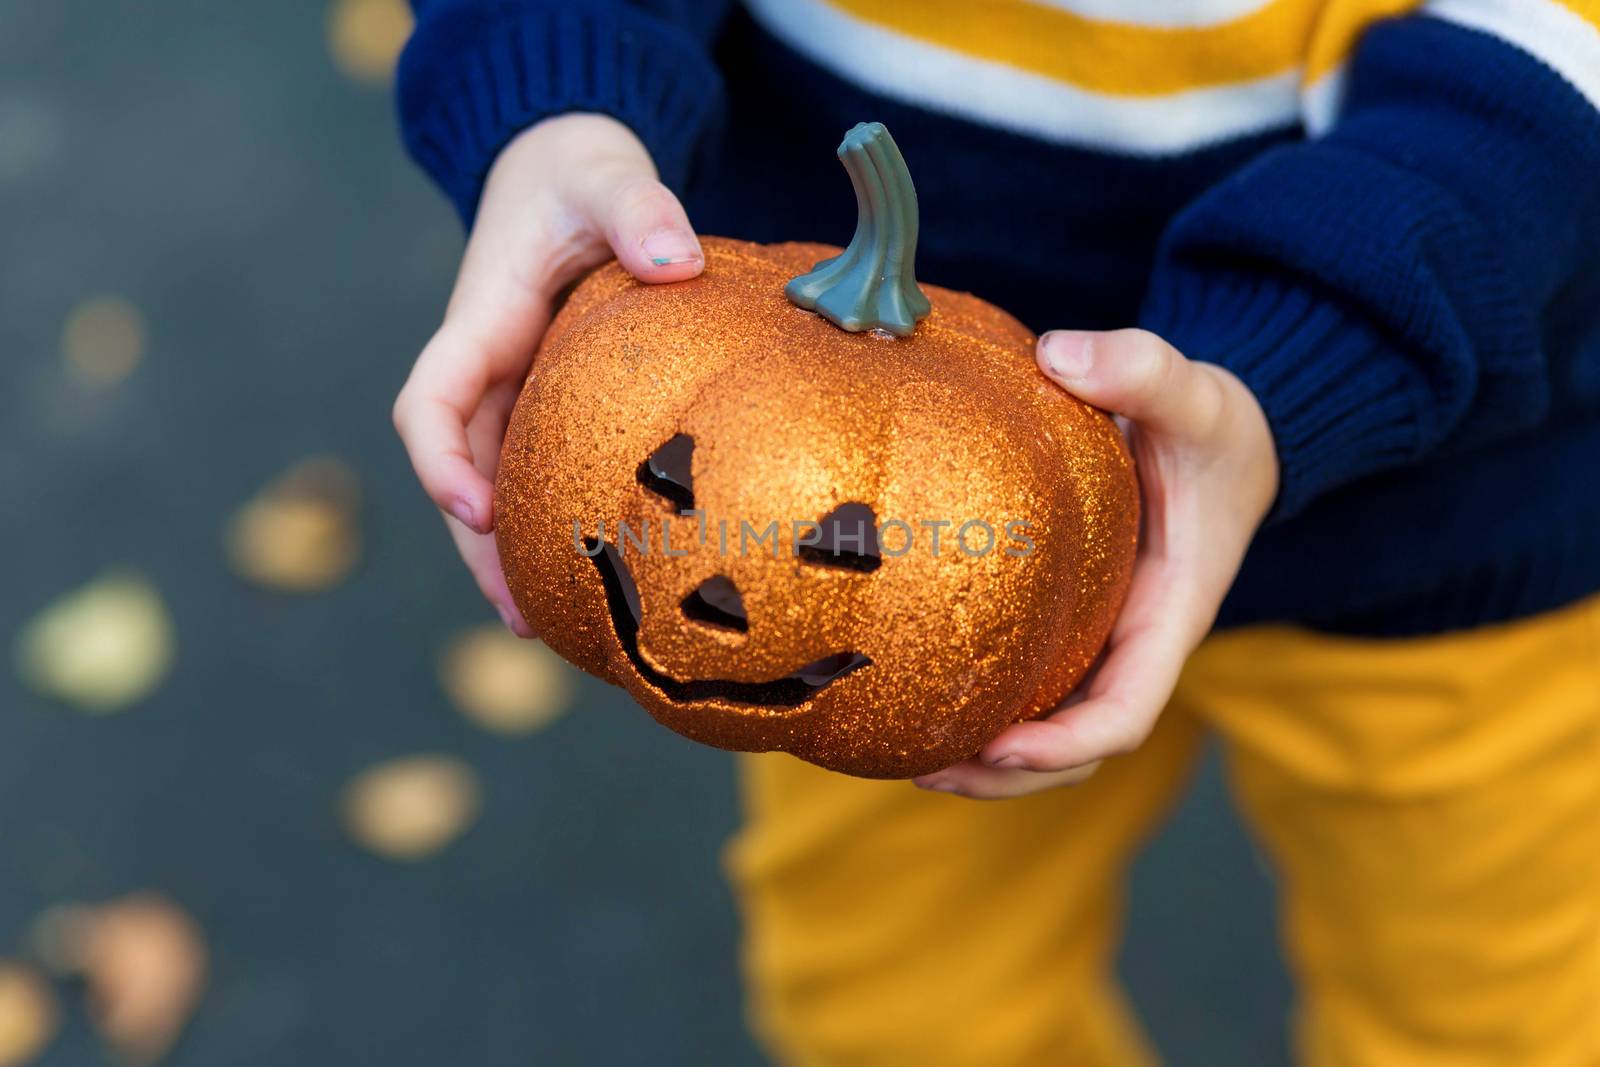 Children's hands holding a toy pumpkin lantern for the holiday halloween